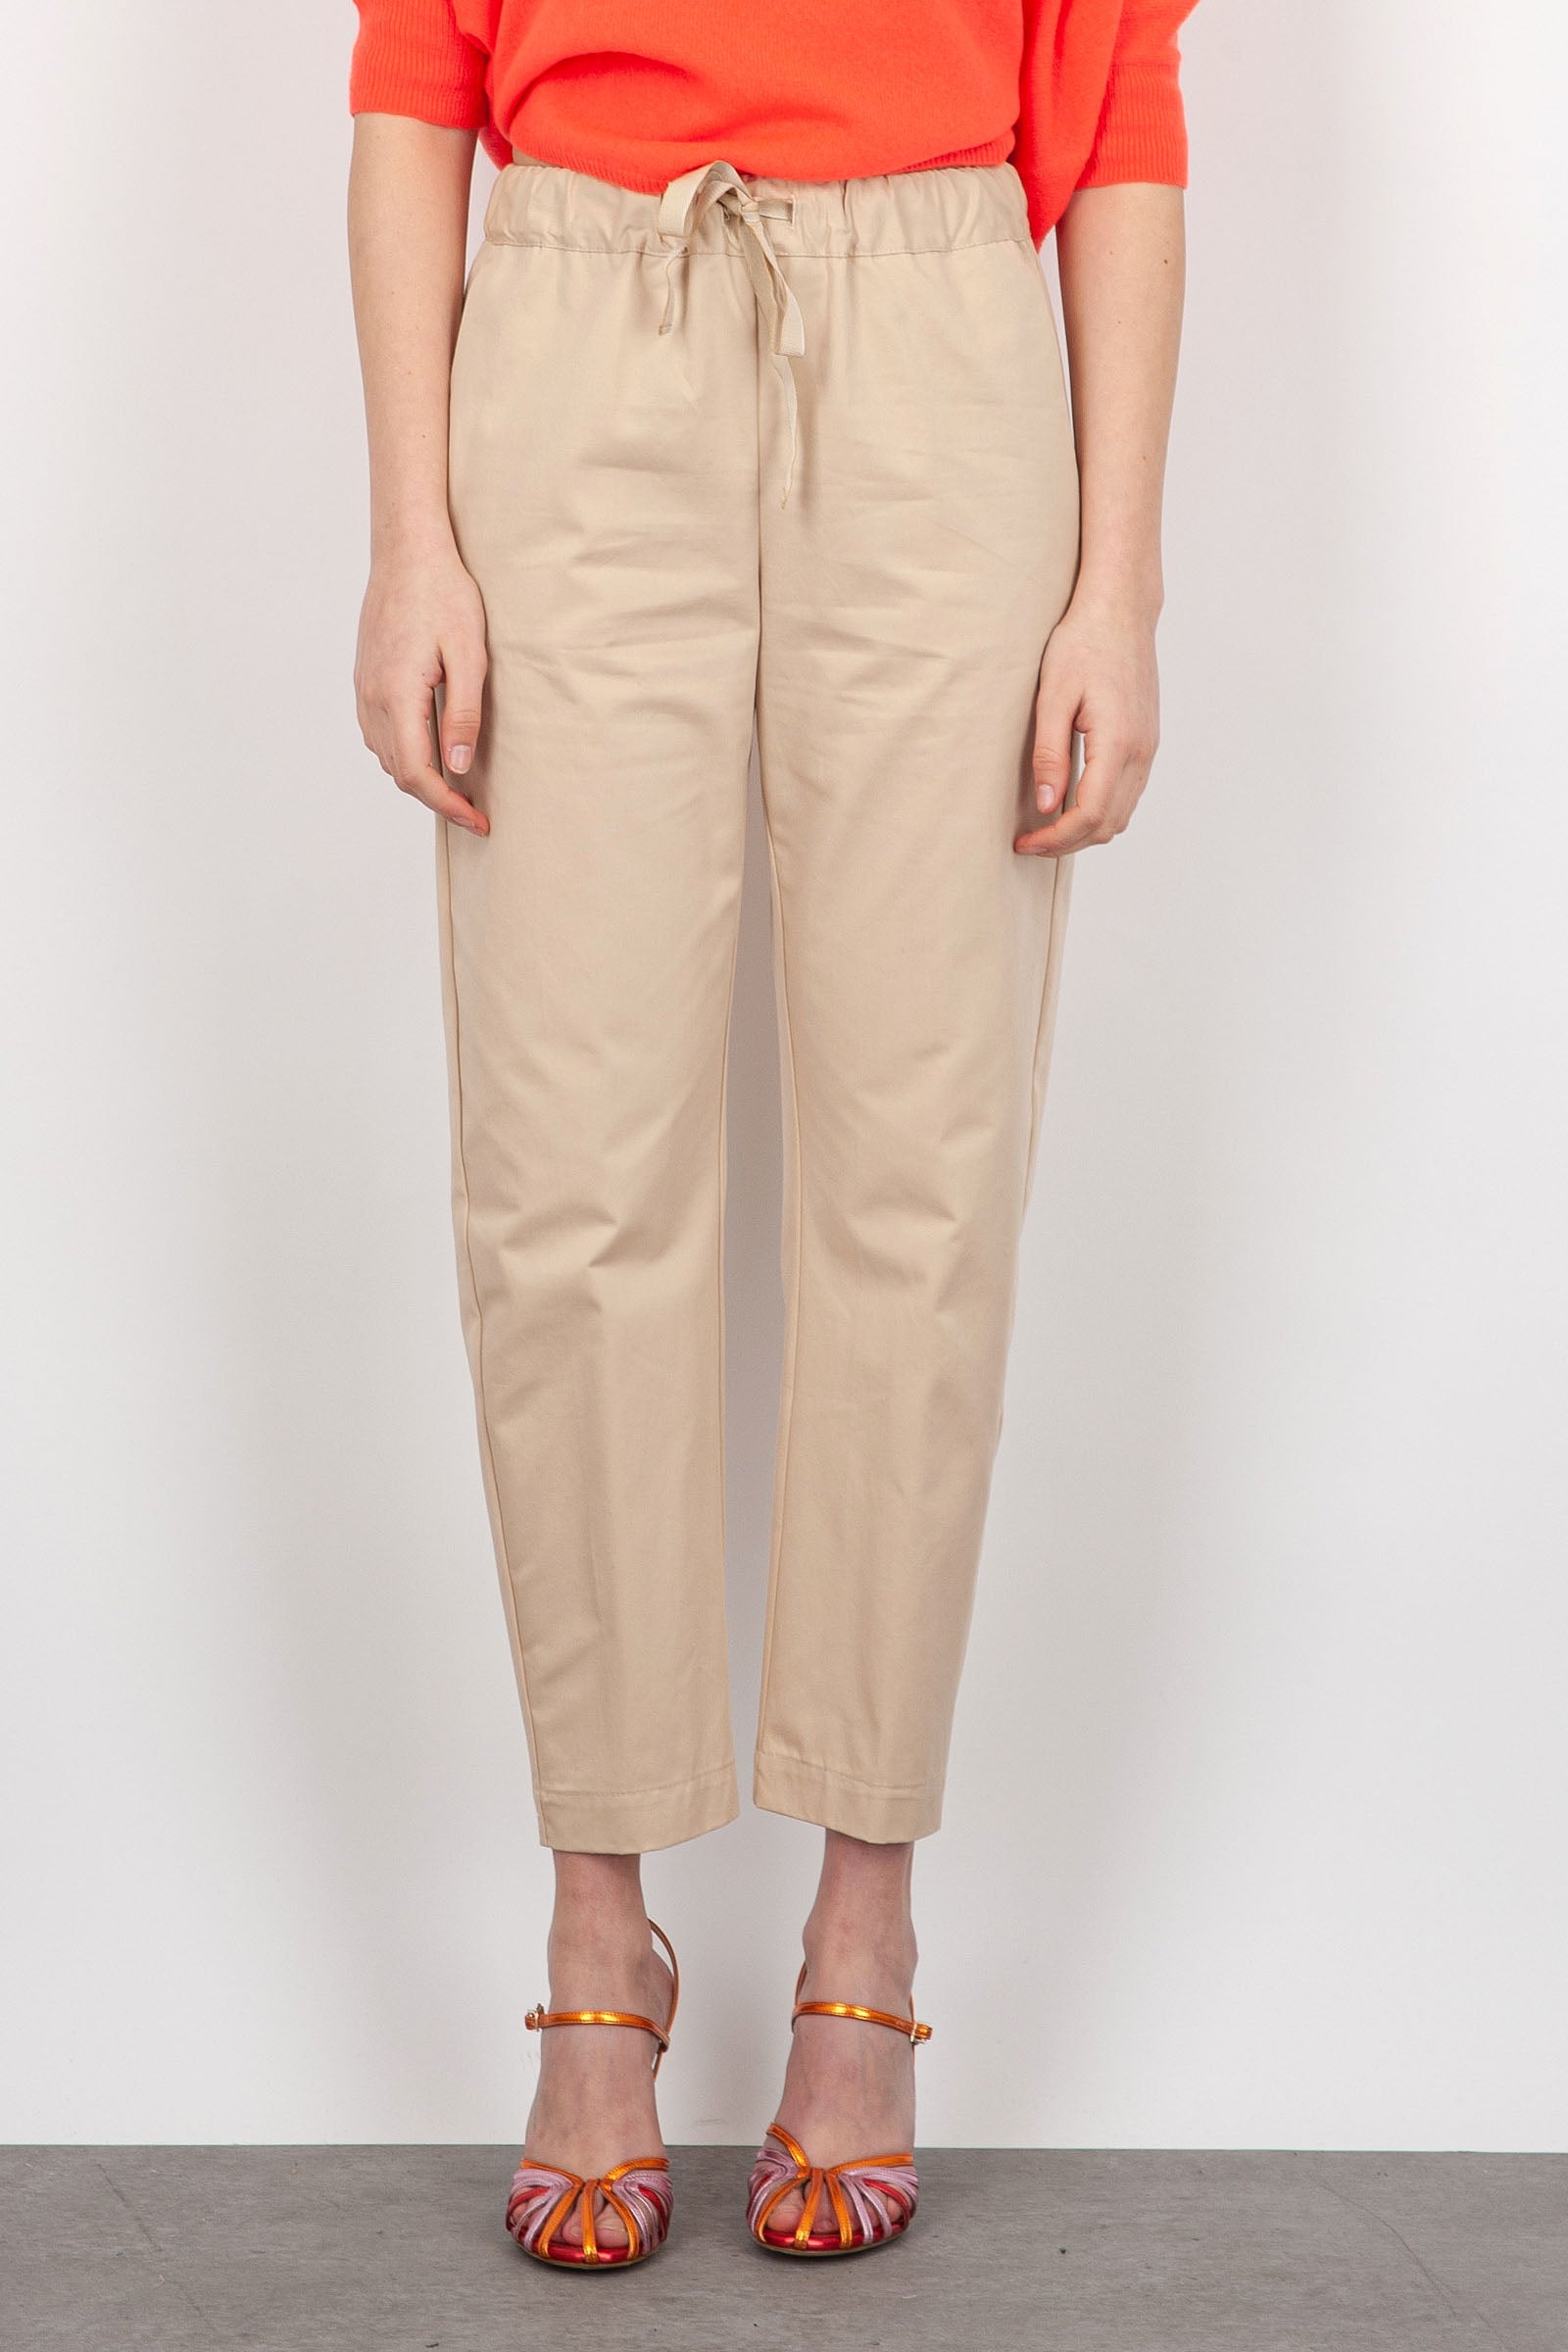 Semicouture Buddy Trousers Camel Cotton - 3